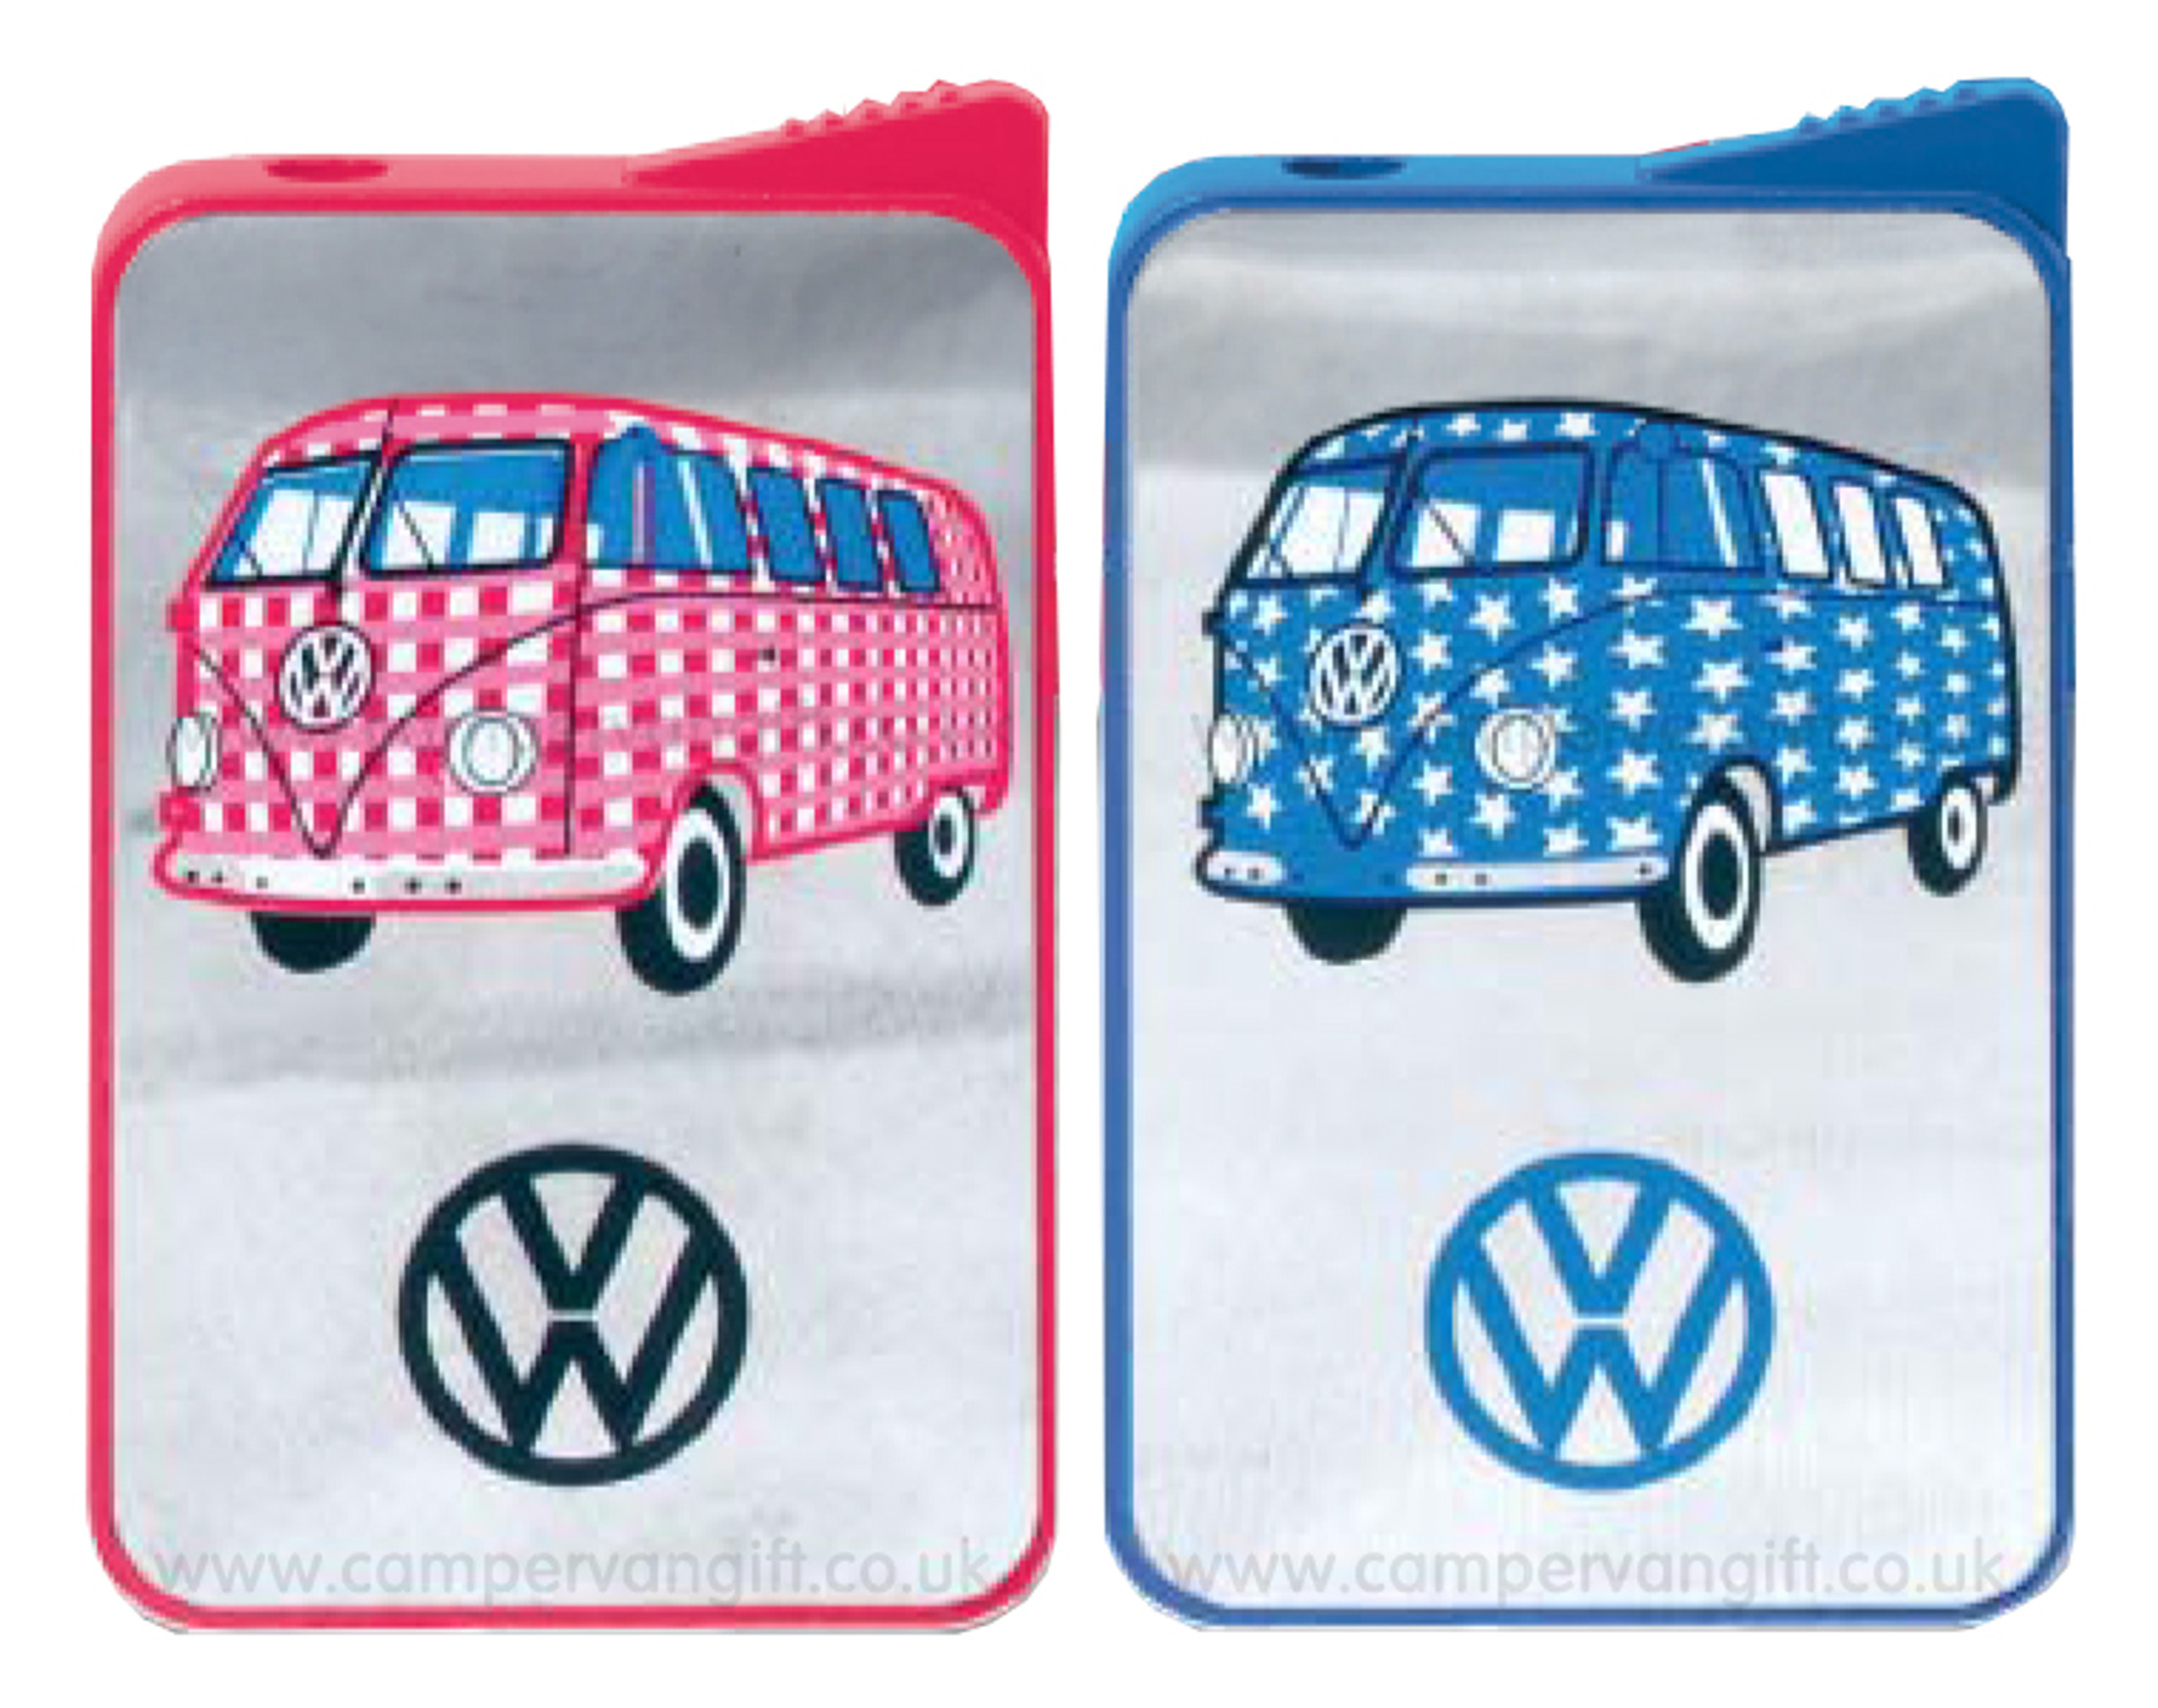 Official VW Card Holder - Perfect campervan gift to keep your bank card ...